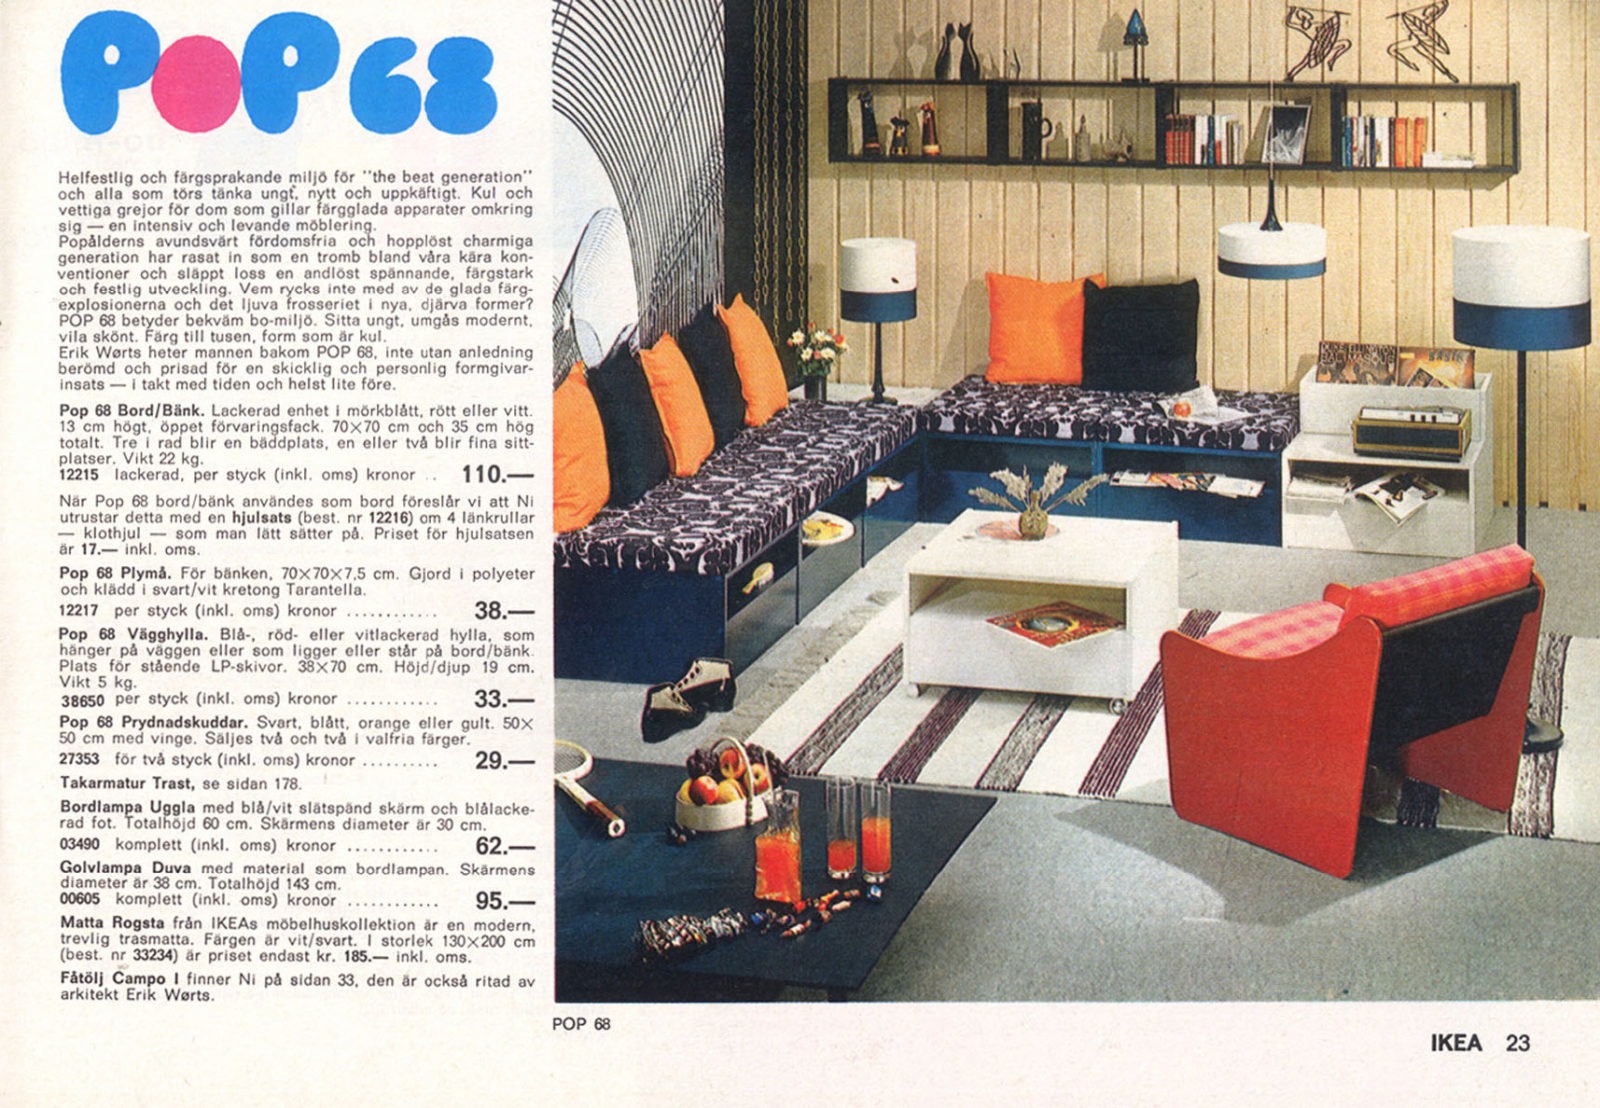 Catalogue spread with 1960s youthful interior, low furniture in bright blue, red, orange and black.